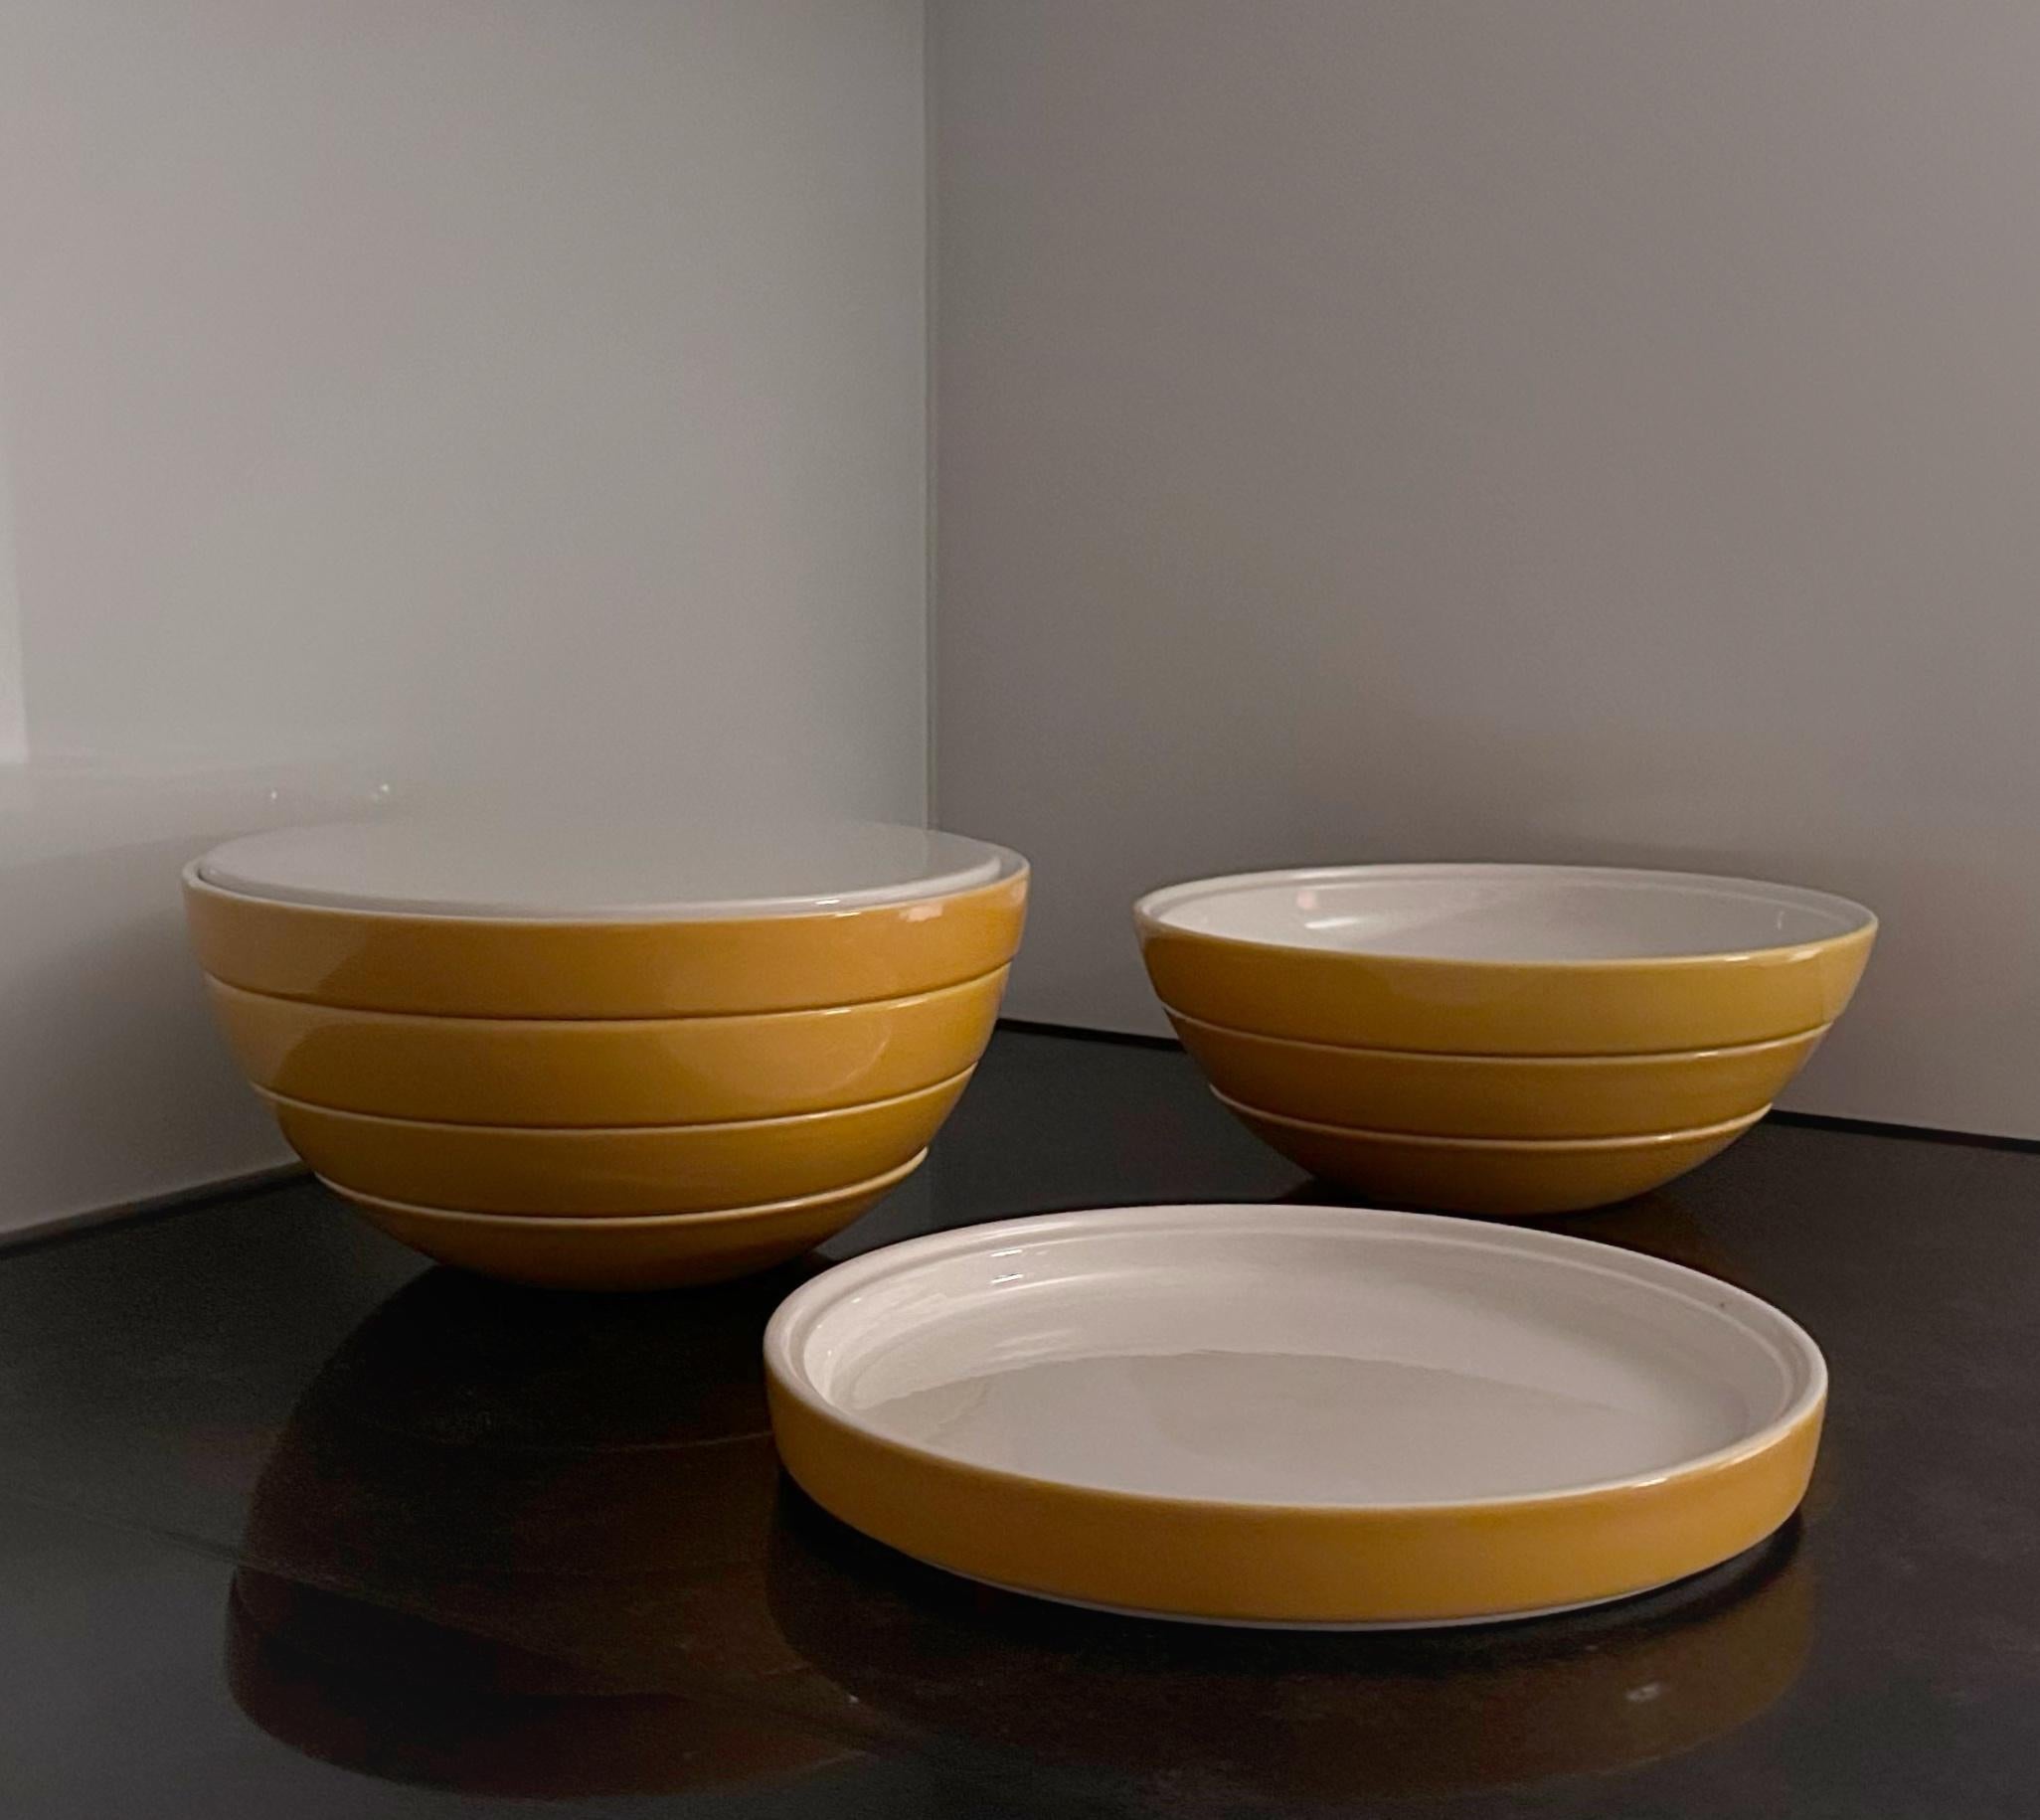 Designed by Riccardo Schweizer and produced by Ceramica Pagnossin.
Made in glazed ceramic and in very good original condition.
Some plates are stamped with the manufacturer's logo 'Pagnossin Ceramica, Treviso, Italy, Linea Schweizer'.

8 curved